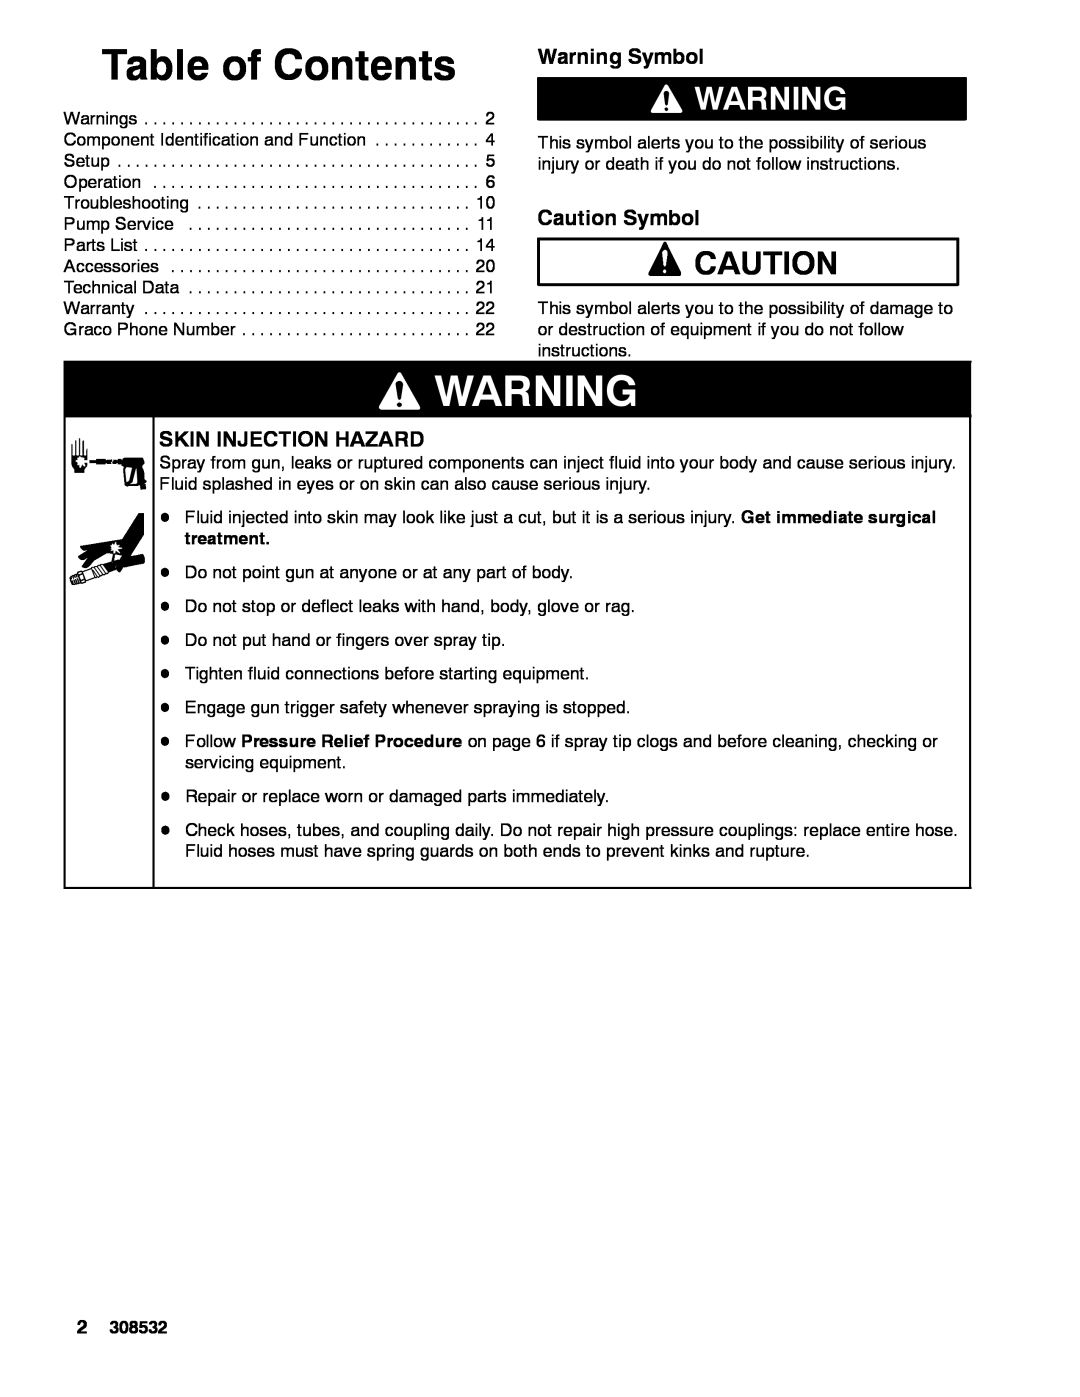 Graco Inc 308532S, 4043 Table of Contents, Warning Symbol, Caution Symbol, Skin Injection Hazard 